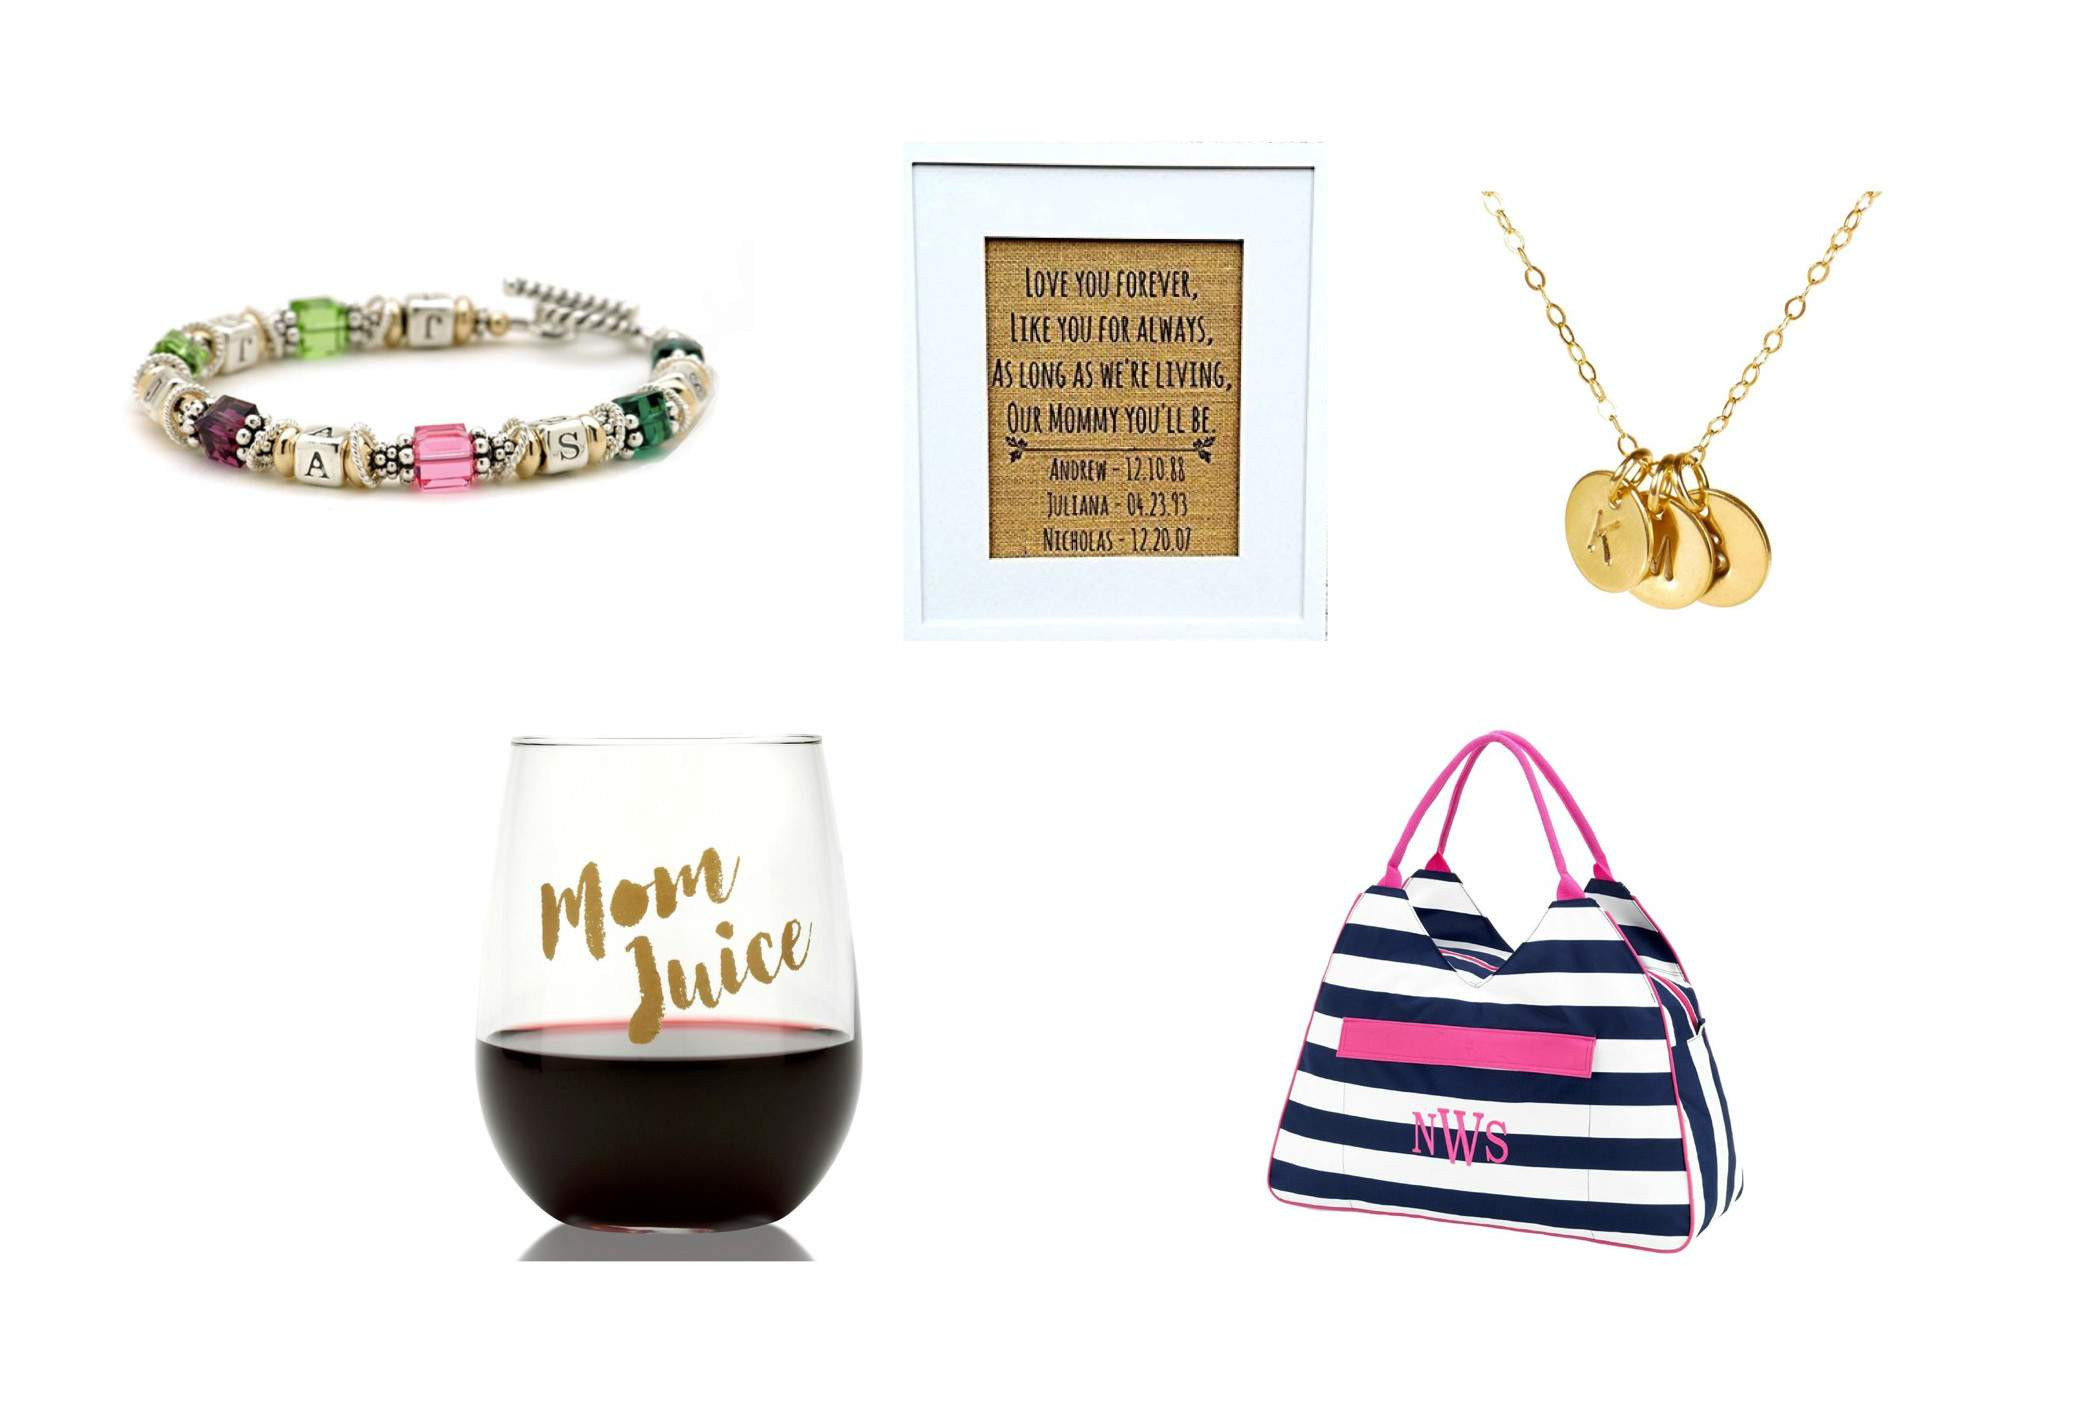 Qvc Mother's Day Gifts
 Top 10 Best Personalized Mother’s Day Gifts for New Moms